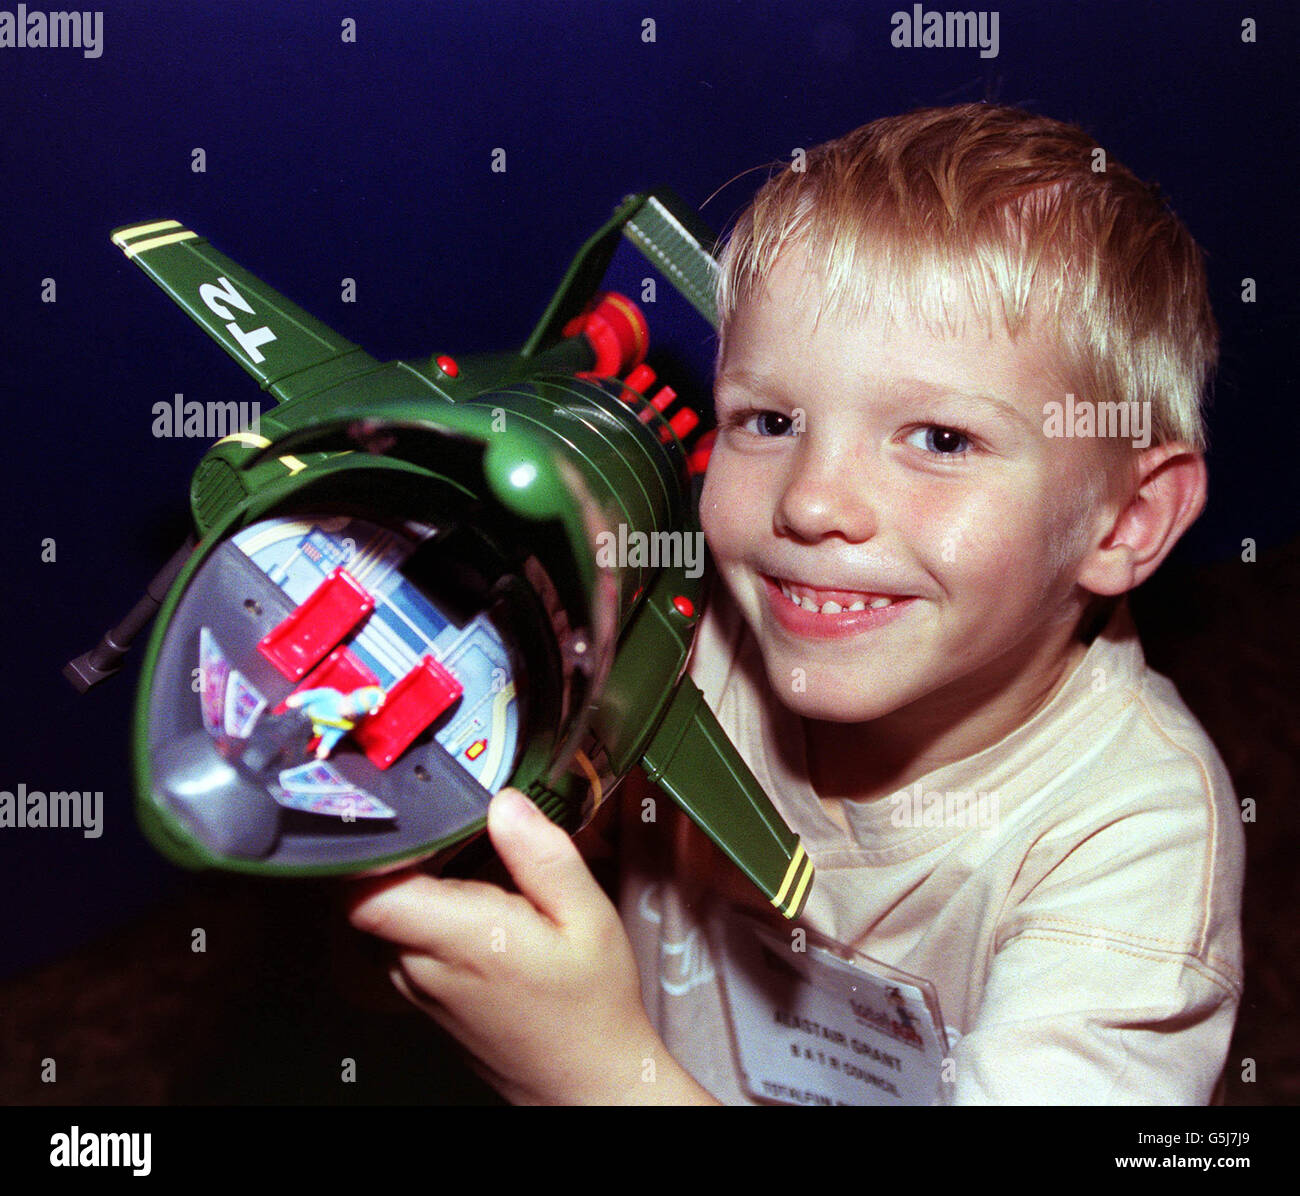 Six year-old Alastair Grant from Chorley Wood, Herts, plays with a Thunderbirds Electronic Playset - one of the top ten toys according to the British Association of Toy Retailers, at the launch of the British Toy and Hobby Association's Totalfun fair at Olympia, London. Stock Photo